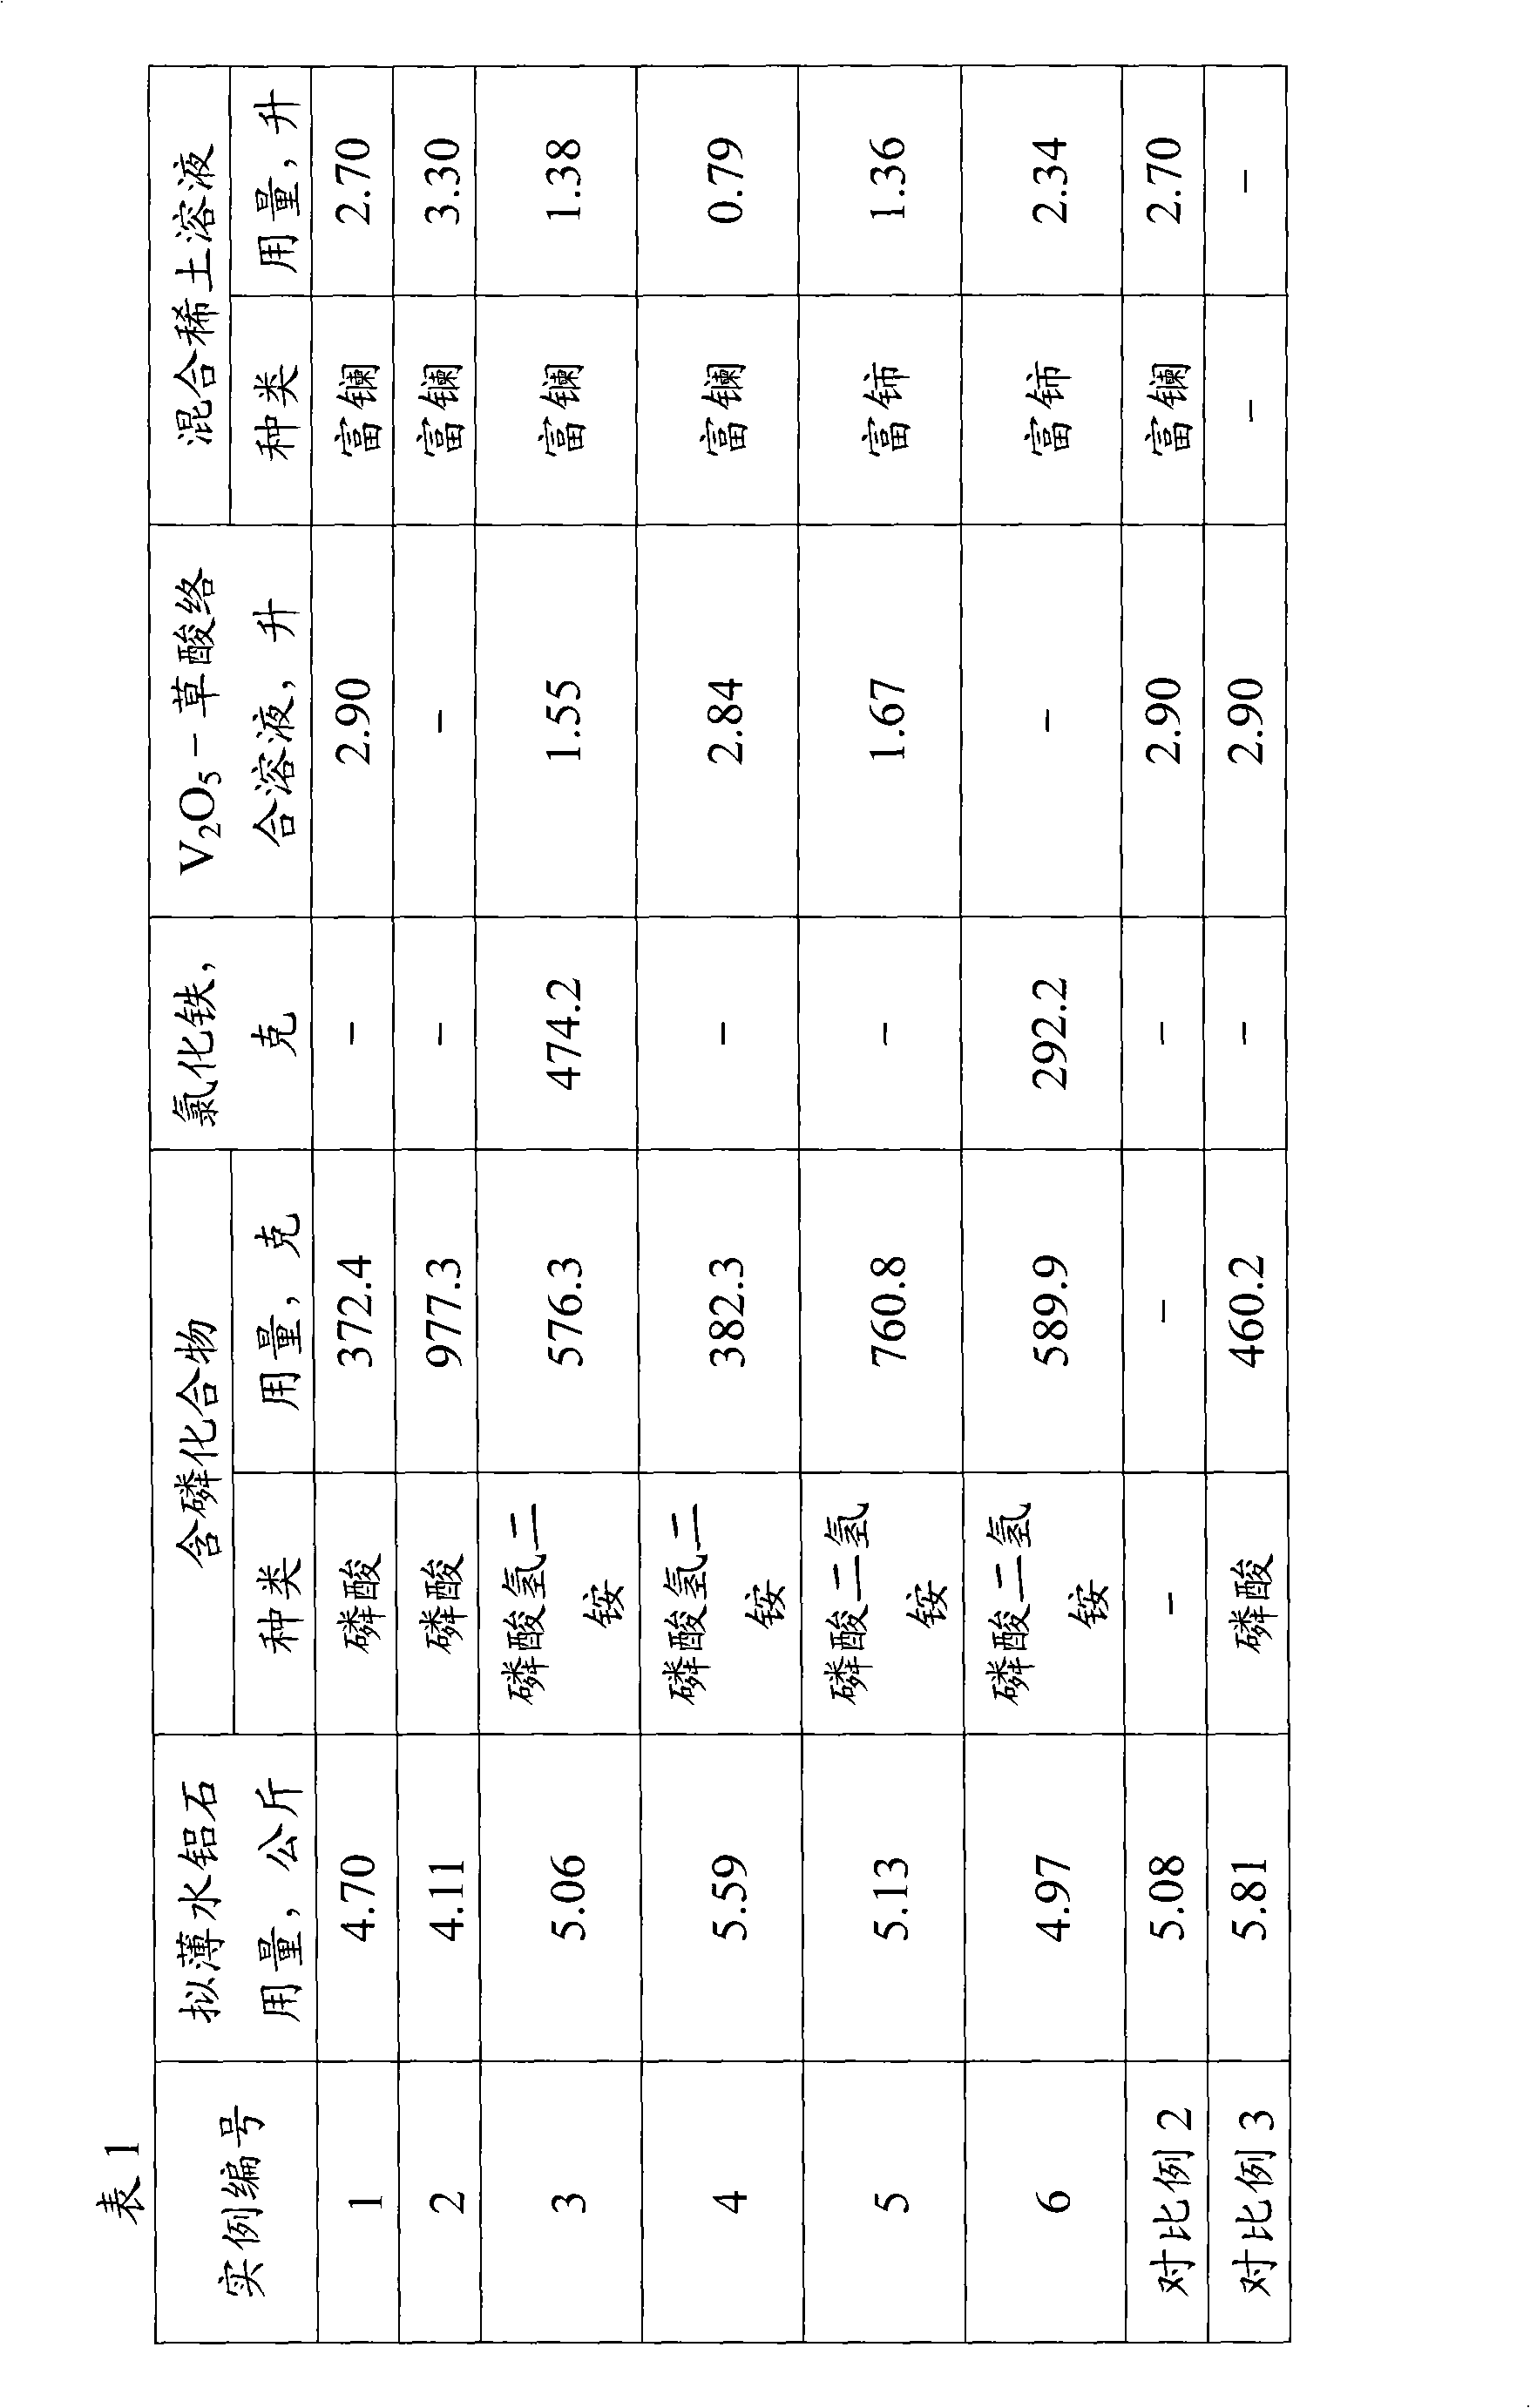 Composition for reducing discharge of NOx in FCC stack gas